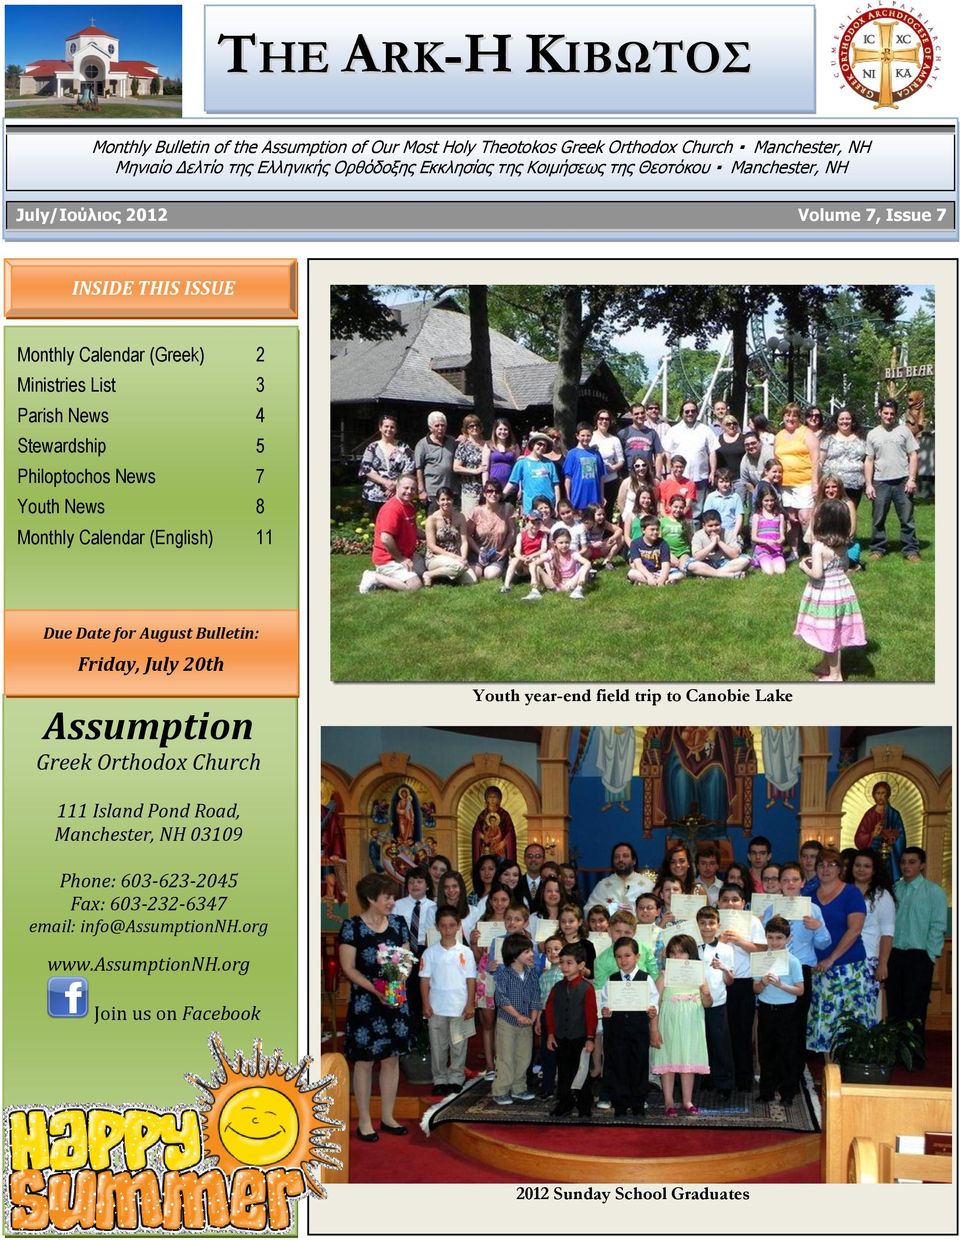 Philoptochos News 7 Youth News 8 Monthly Calendar (English) 11 Due Date for August Bulletin: Friday, July 20th Assumption Greek Orthodox Church Youth year-end field trip to